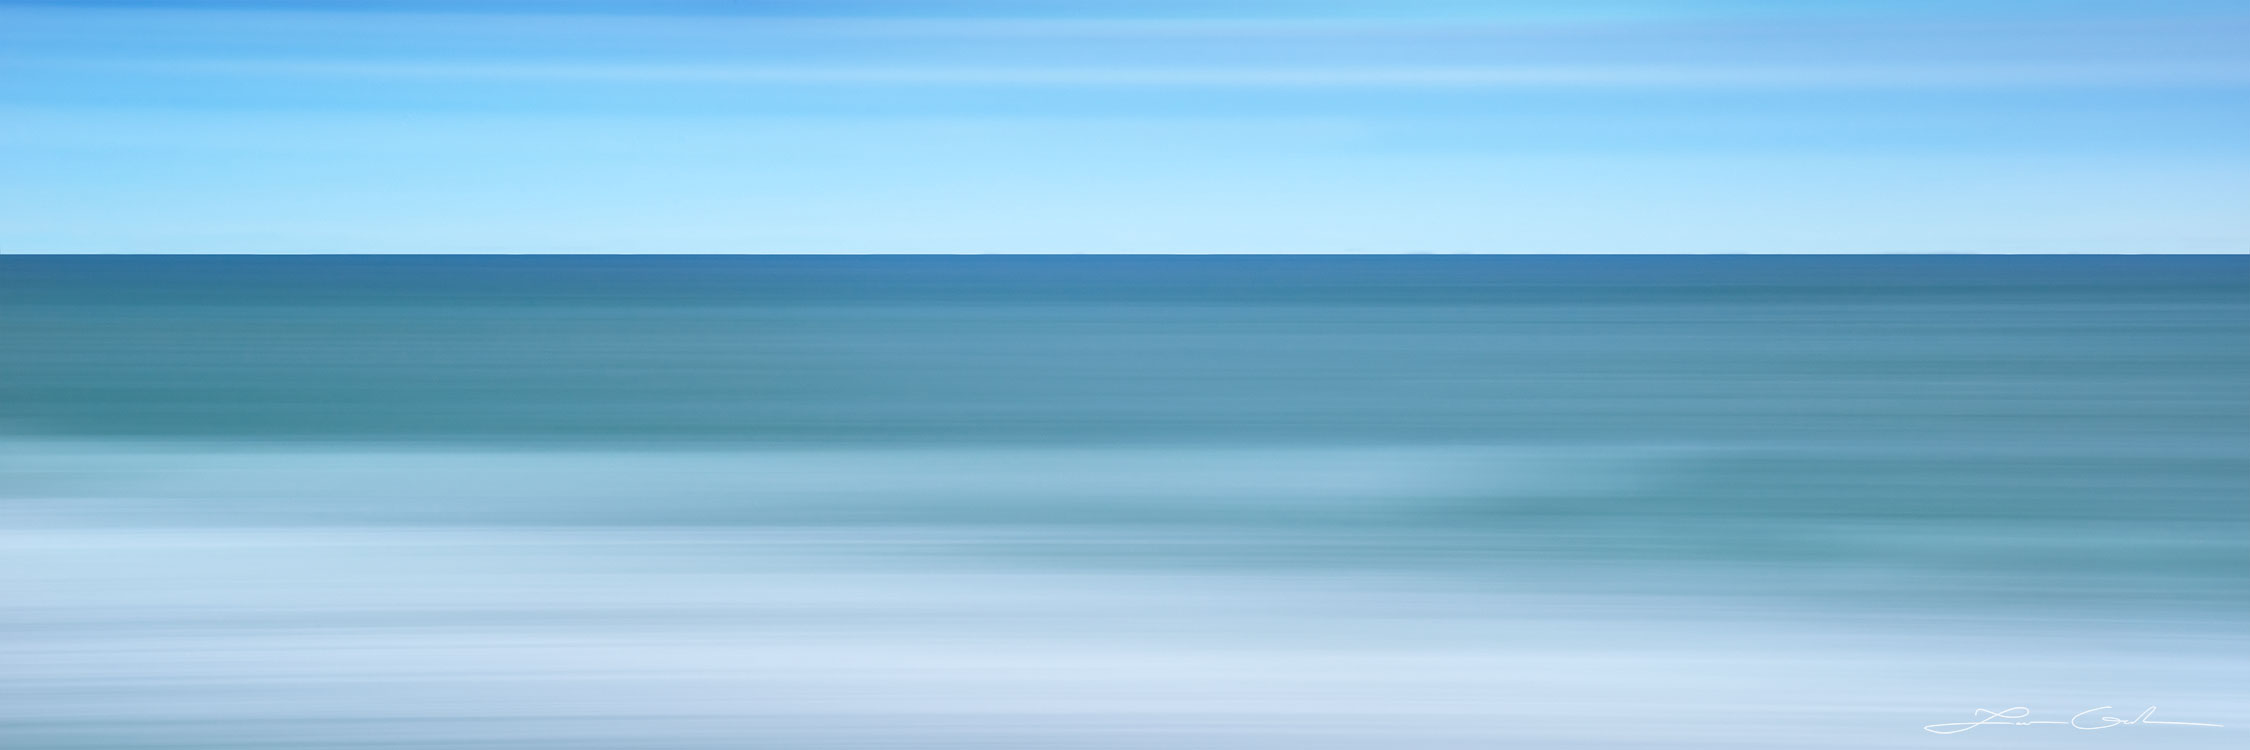 A soft blue ocean abstract panoramic photograph with blue water and sky - Gintchin Fine Art